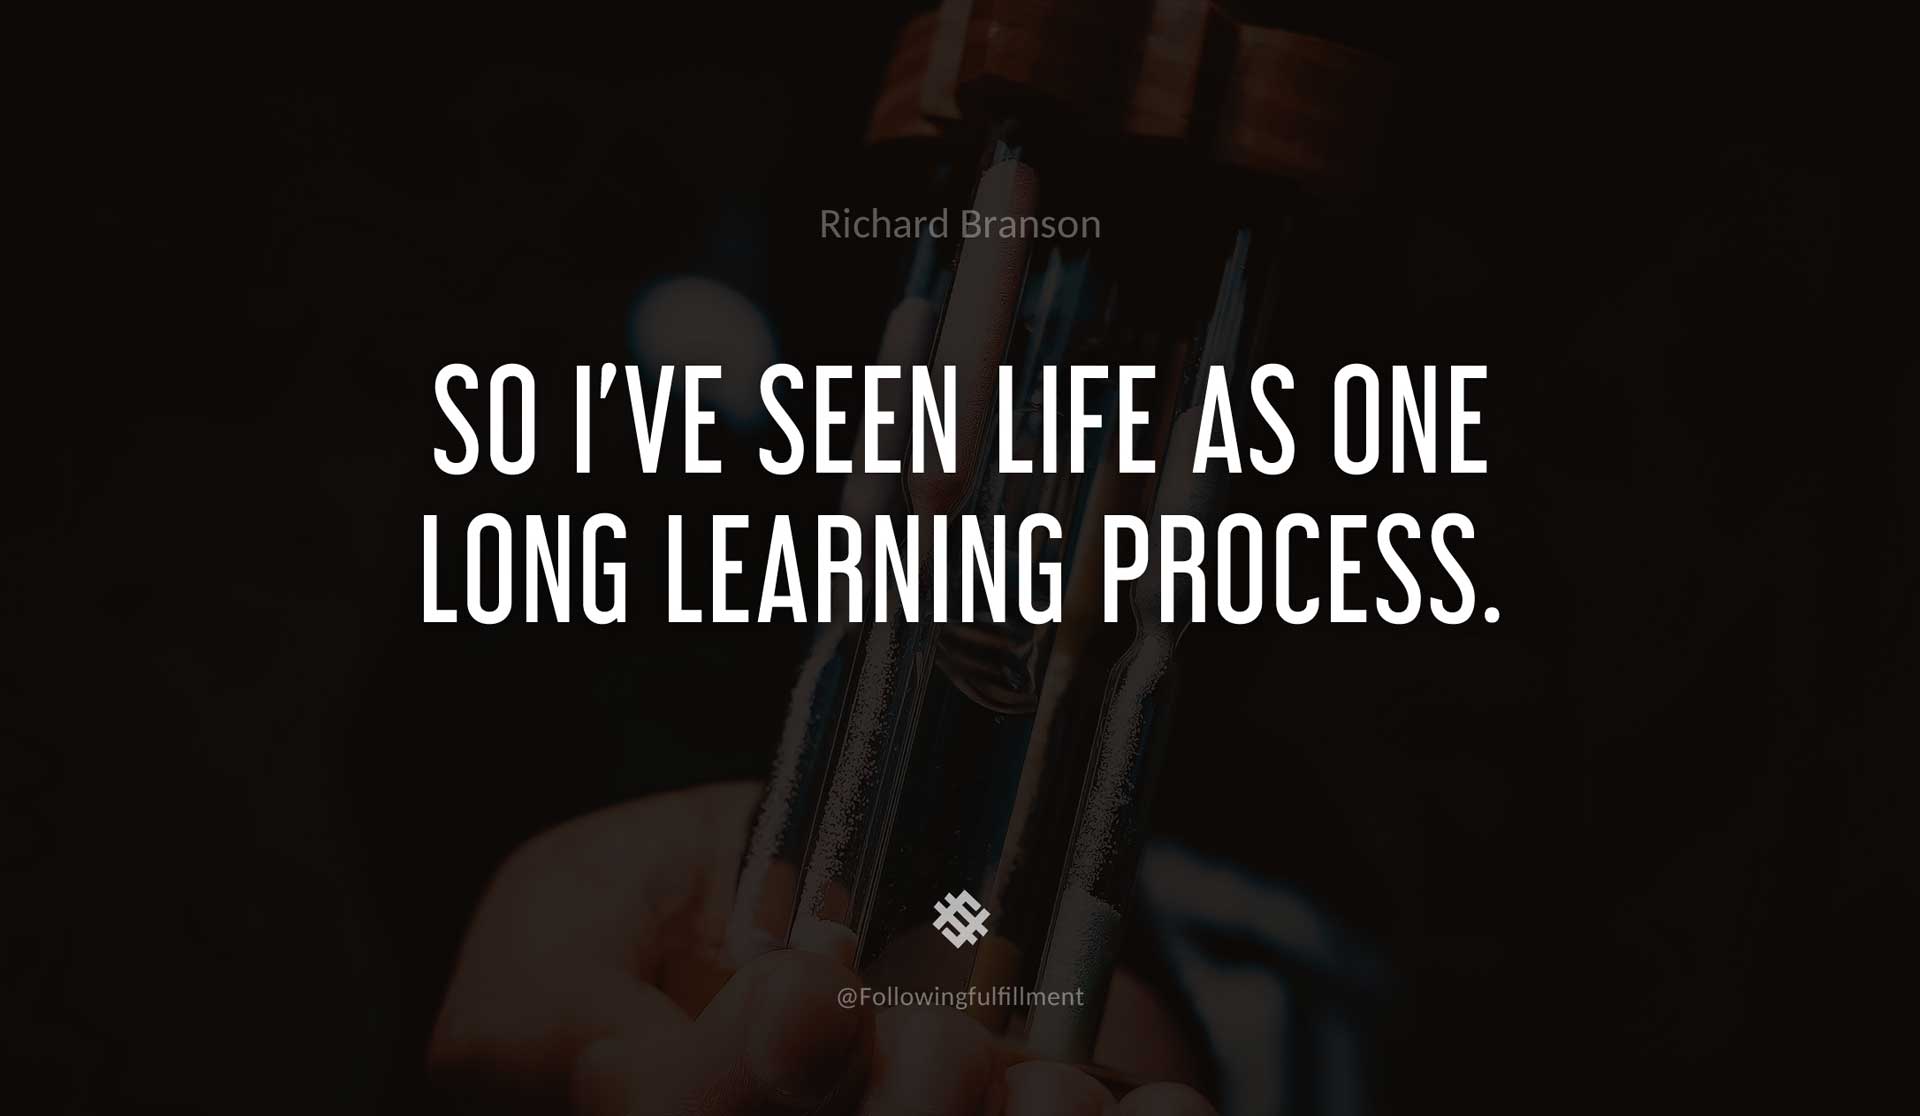 So-I've-seen-life-as-one-long-learning-process.-RICHARD-BRANSON-Quote.jpg